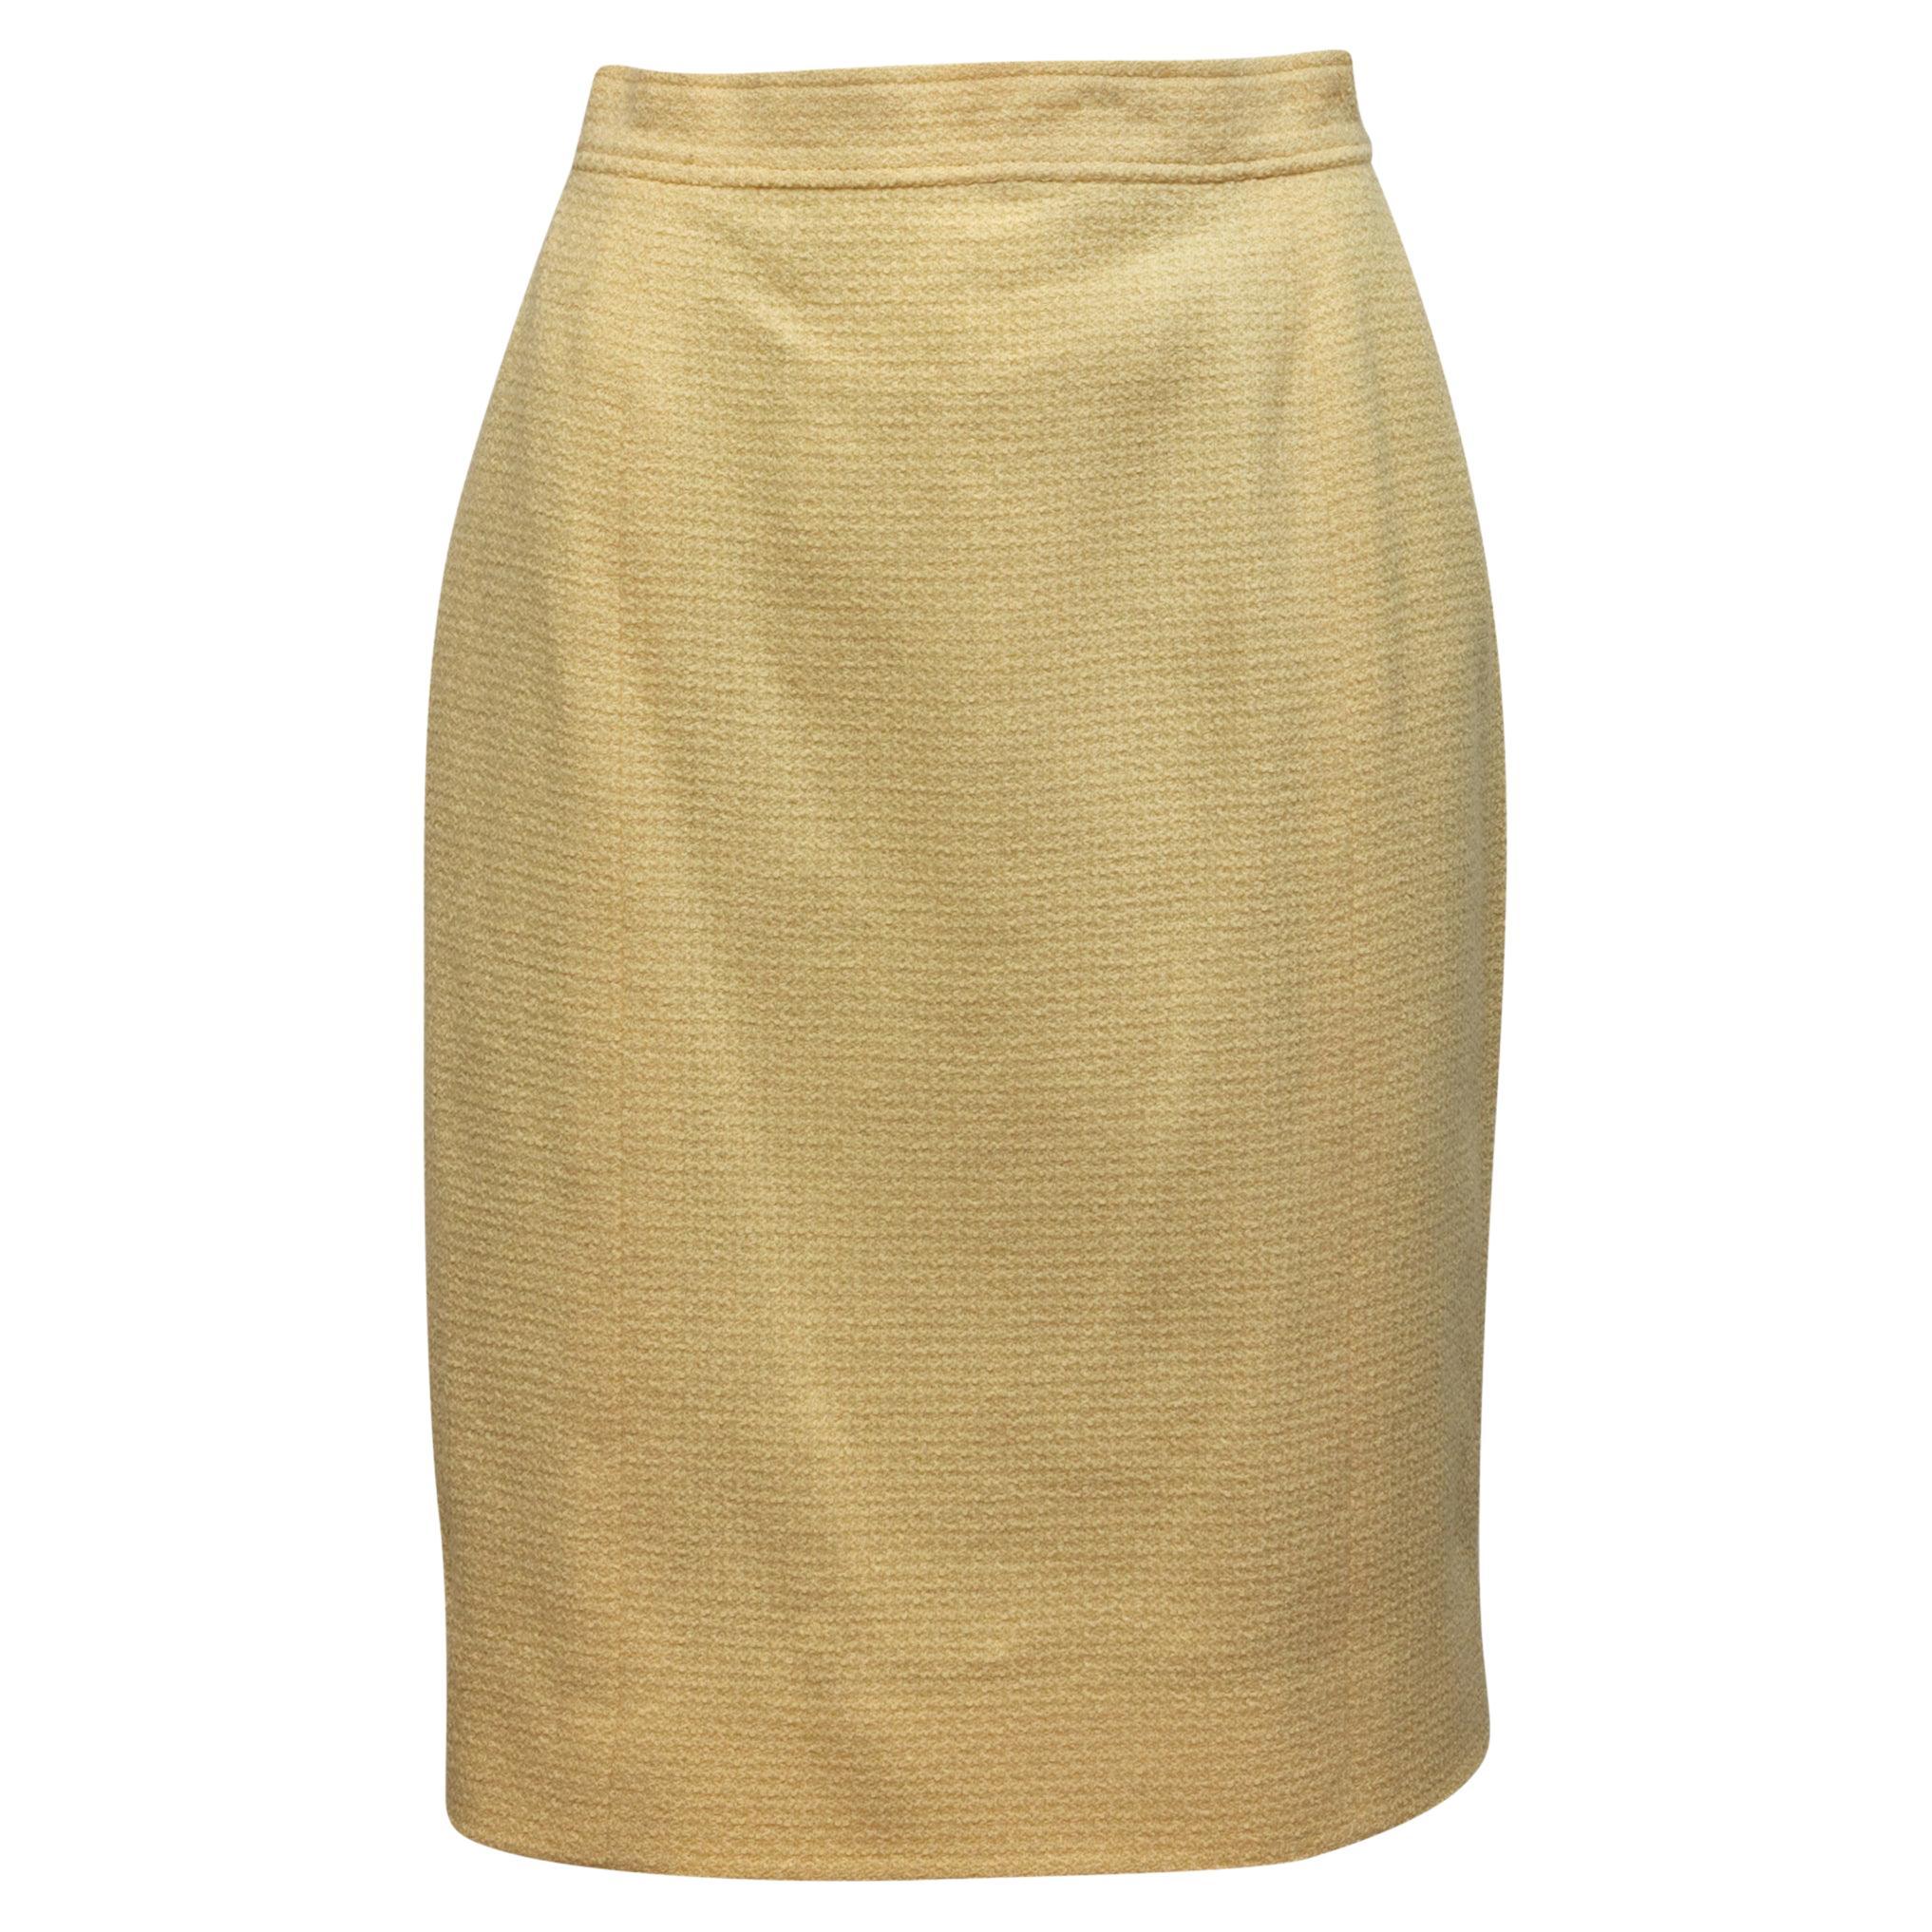 Chanel Boutique Light Yellow Wool Skirt